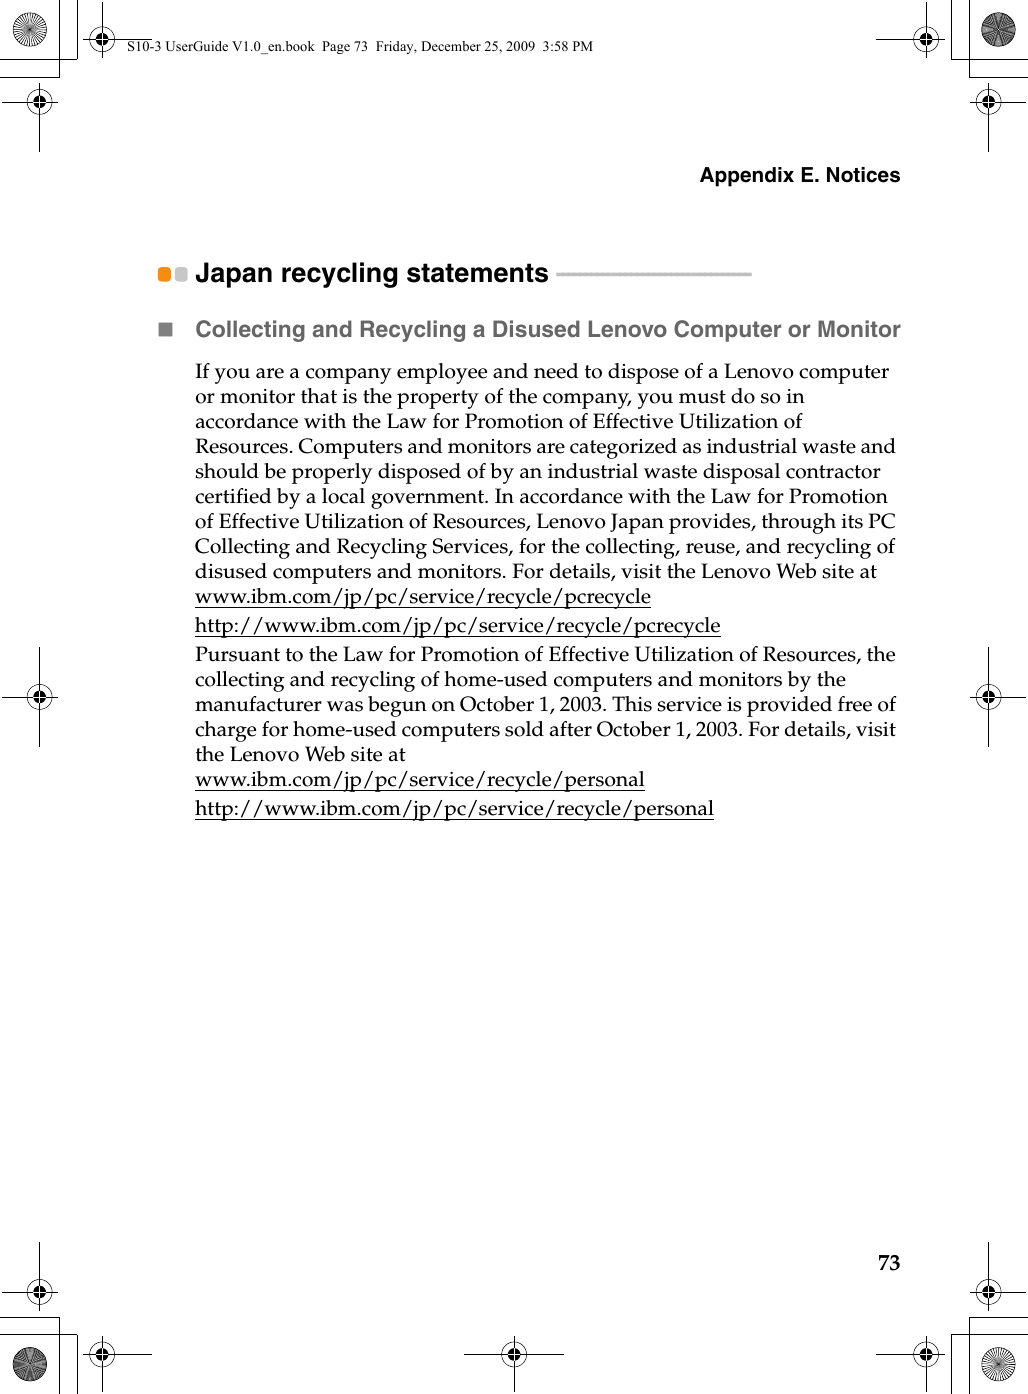 Appendix E. Notices73Japan recycling statements  - - - - - - - - - - - - - - - - - - - - - - - - - - - - - - - - - -Collecting and Recycling a Disused Lenovo Computer or MonitorIf you are a company employee and need to dispose of a Lenovo computer or monitor that is the property of the company, you must do so in accordance with the Law for Promotion of Effective Utilization of Resources. Computers and monitors are categorized as industrial waste and should be properly disposed of by an industrial waste disposal contractor certified by a local government. In accordance with the Law for Promotion of Effective Utilization of Resources, Lenovo Japan provides, through its PC Collecting and Recycling Services, for the collecting, reuse, and recycling of disused computers and monitors. For details, visit the Lenovo Web site at www.ibm.com/jp/pc/service/recycle/pcrecycle http://www.ibm.com/jp/pc/service/recycle/pcrecyclePursuant to the Law for Promotion of Effective Utilization of Resources, the collecting and recycling of home-used computers and monitors by the manufacturer was begun on October 1, 2003. This service is provided free of charge for home-used computers sold after October 1, 2003. For details, visit the Lenovo Web site at www.ibm.com/jp/pc/service/recycle/personalhttp://www.ibm.com/jp/pc/service/recycle/personalS10-3 UserGuide V1.0_en.book  Page 73  Friday, December 25, 2009  3:58 PM